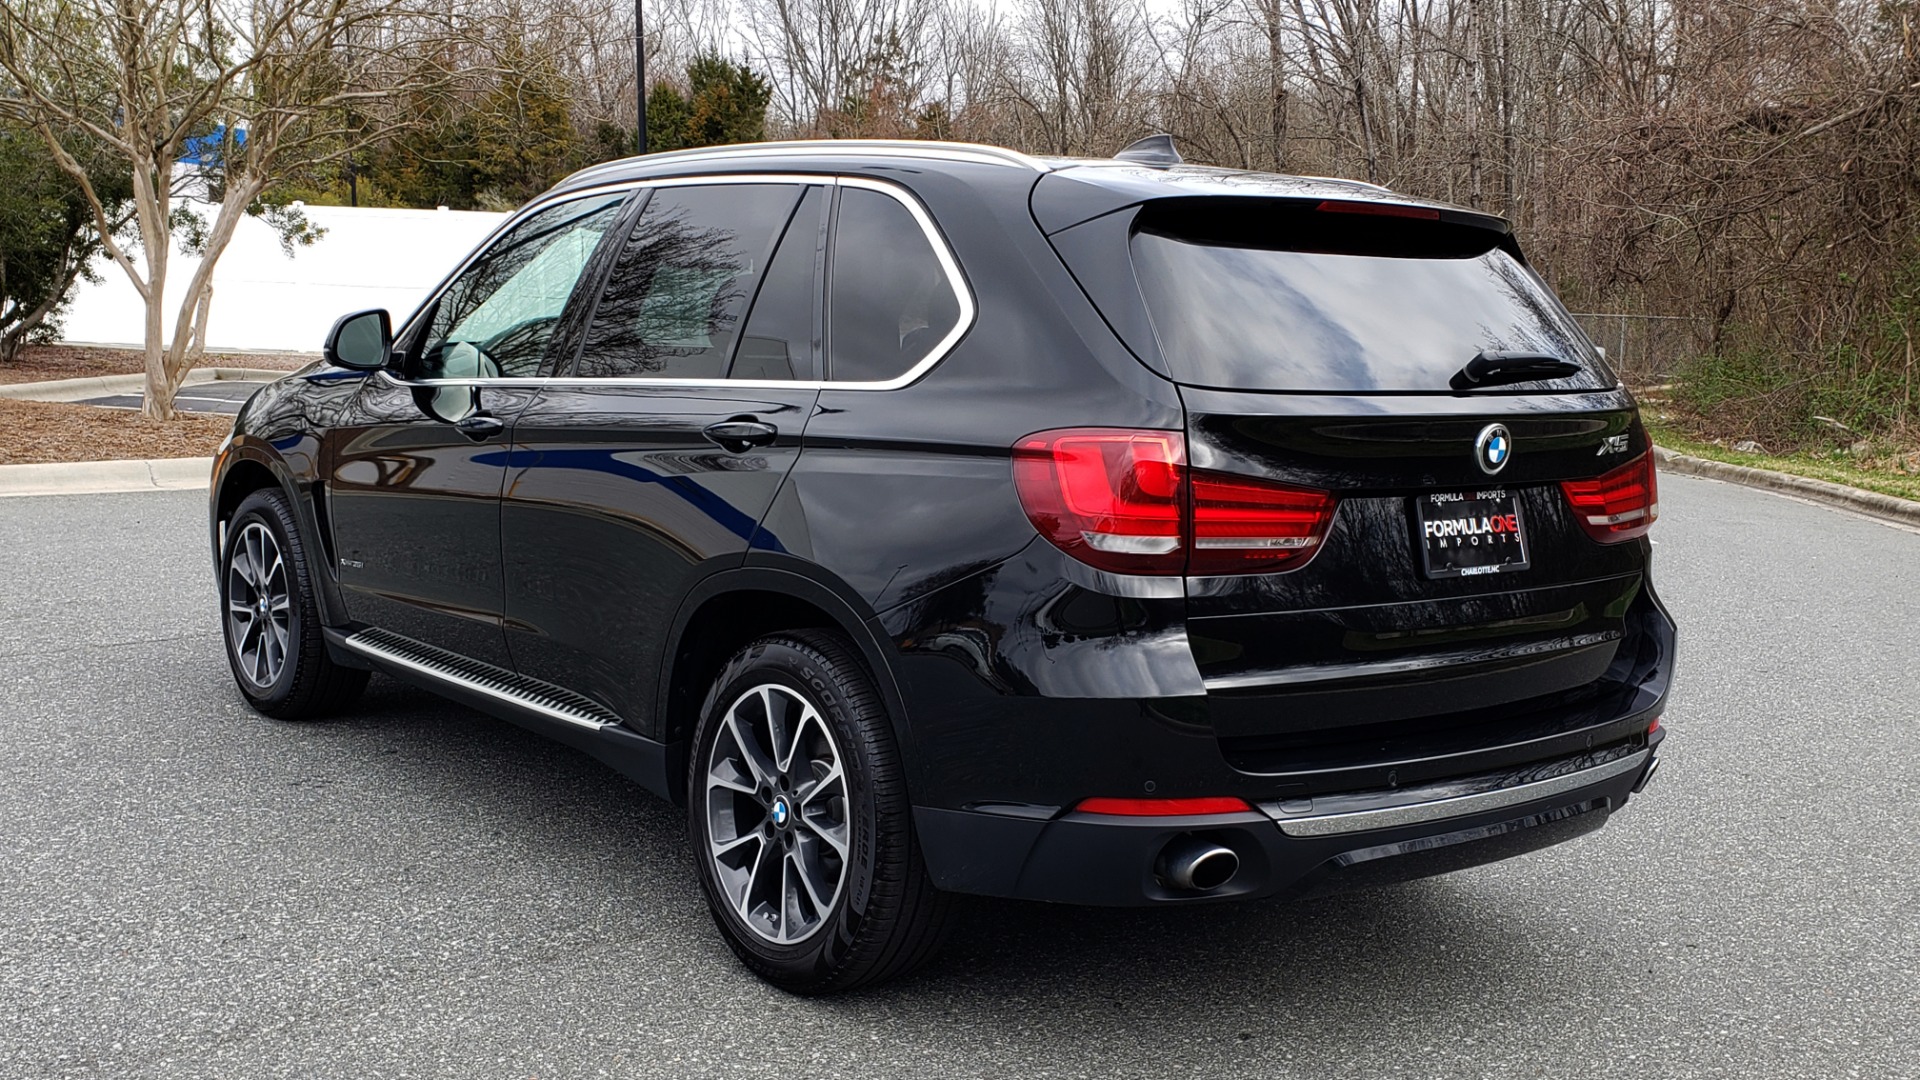 Used 2017 BMW X5 XDRIVE35I / PREM LUX PKG / DRVR ASST / CLD WTHR / APPLE CAR PLAY for sale Sold at Formula Imports in Charlotte NC 28227 3